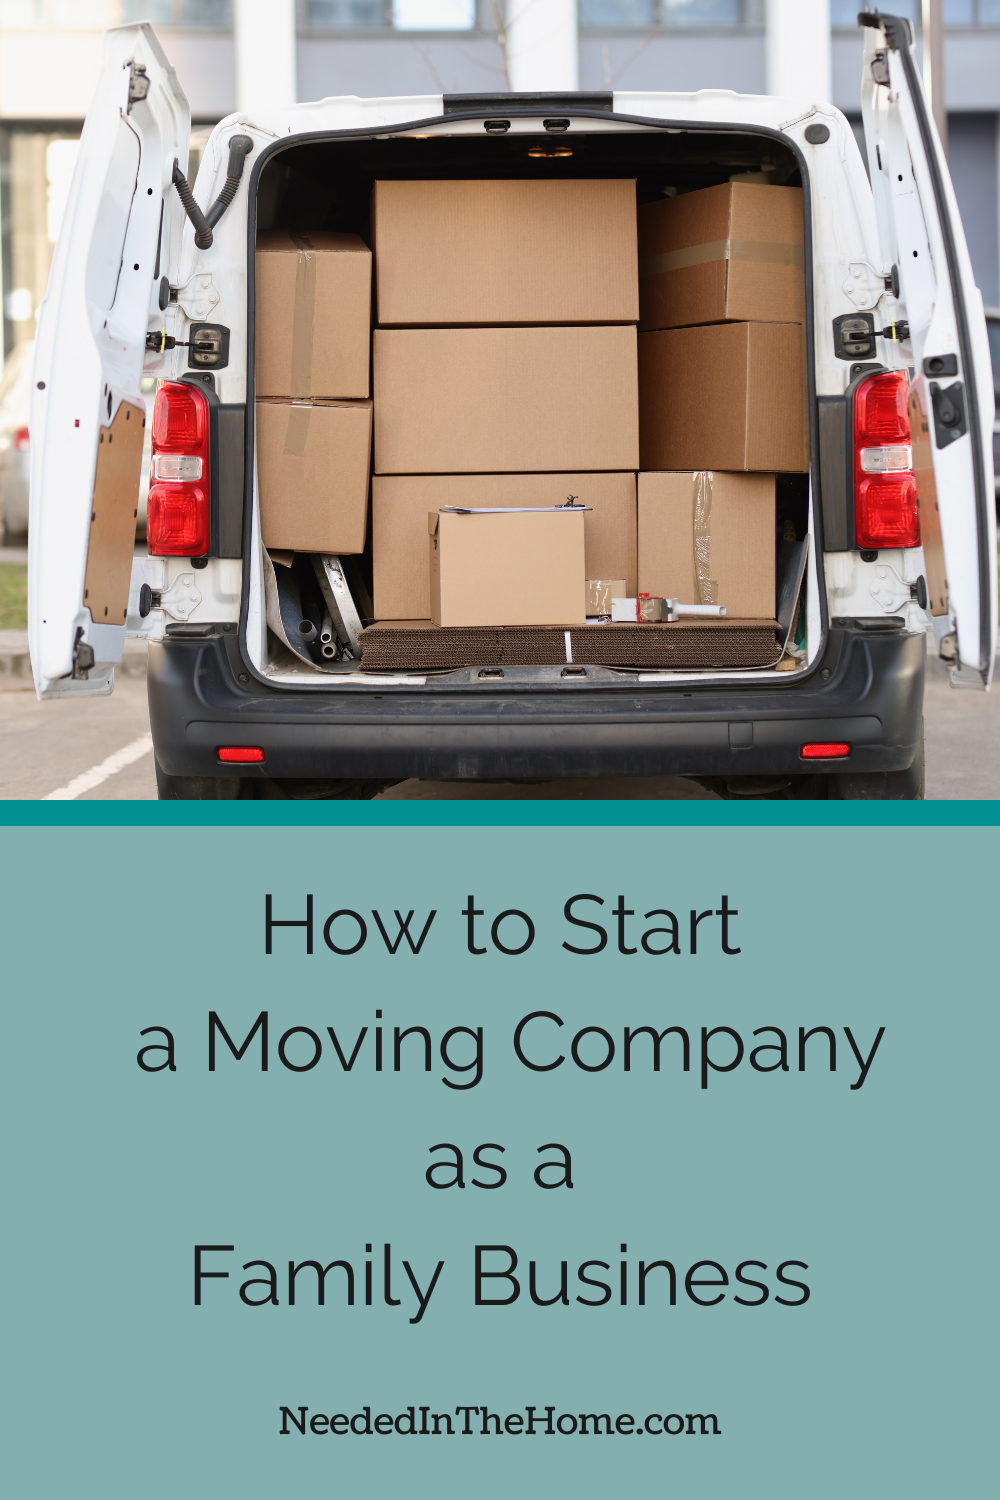 pinterest pin description how to start a moving company as a family business moving van filled with packed cardboard boxes neededinthehome